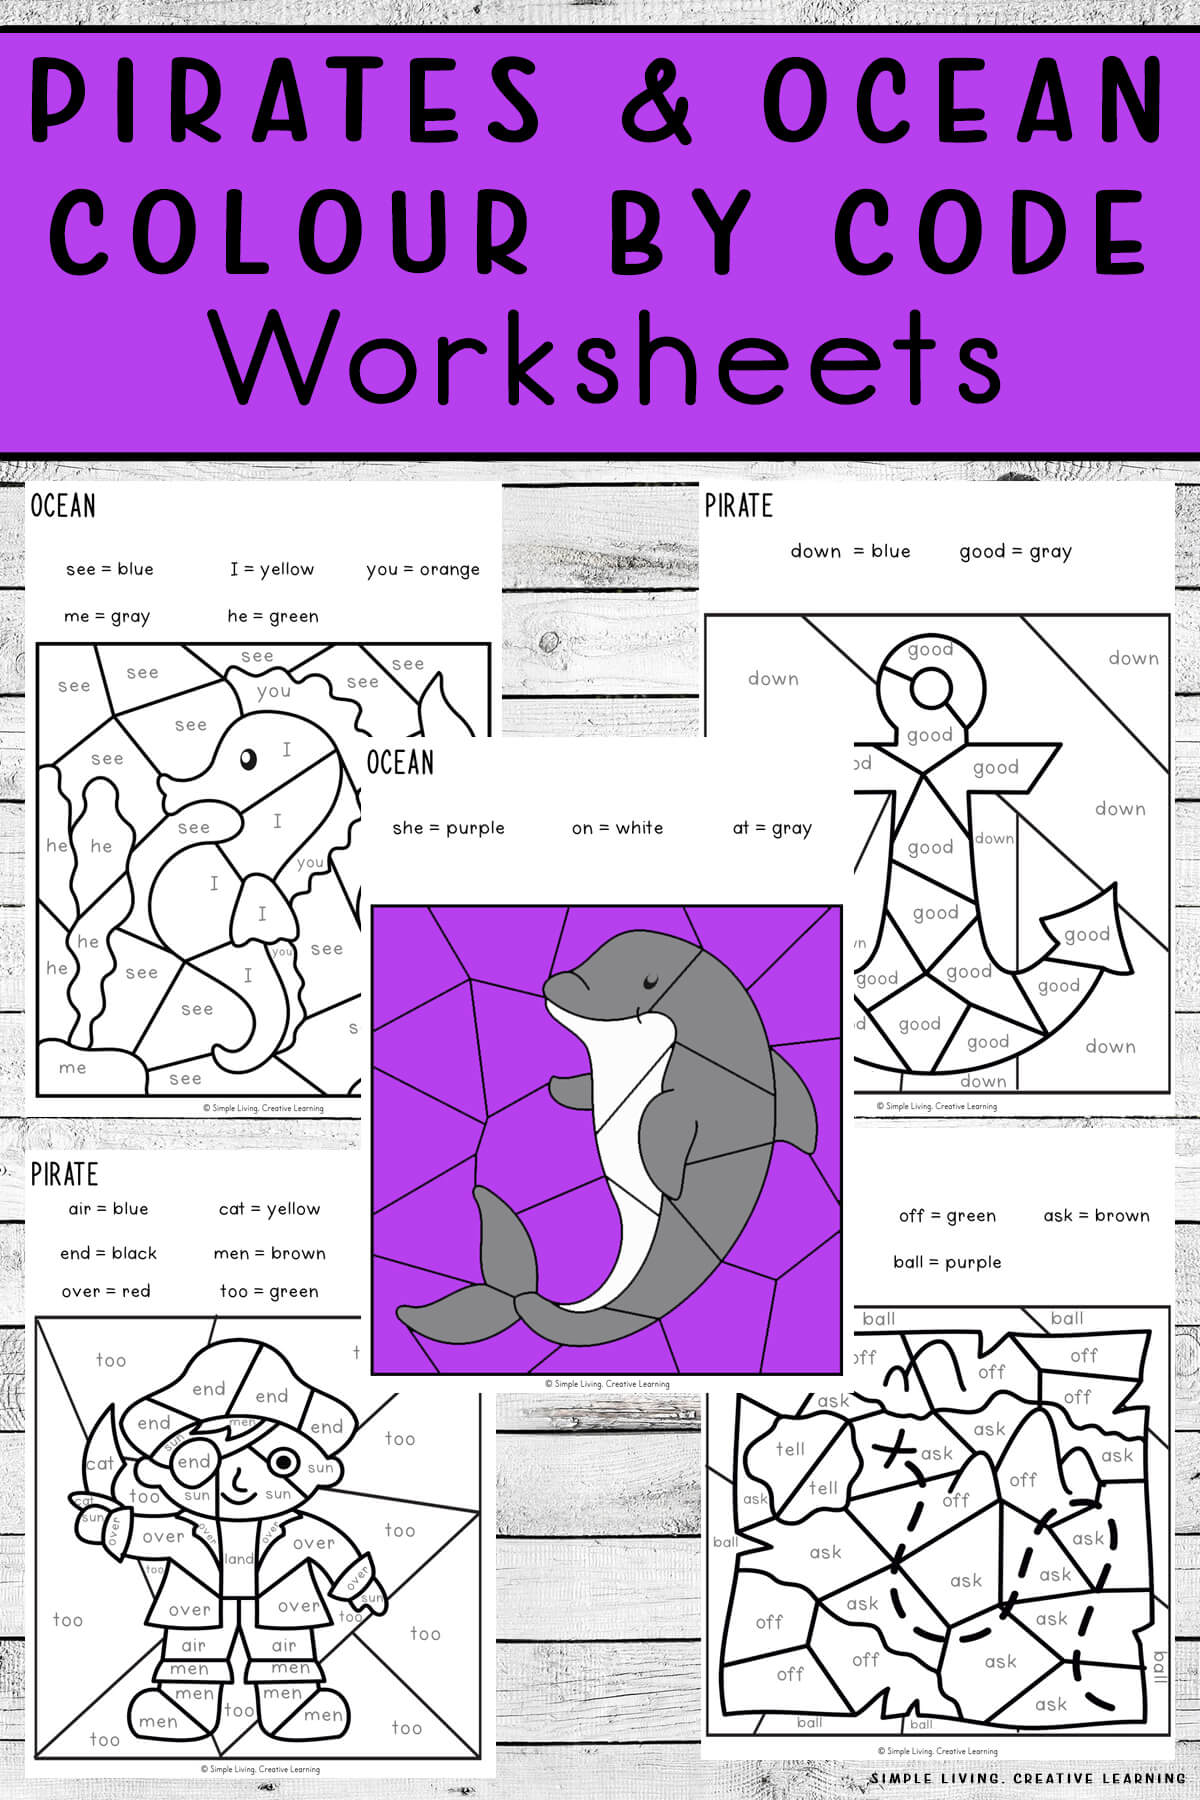 Ocean Colour by Code Worksheets